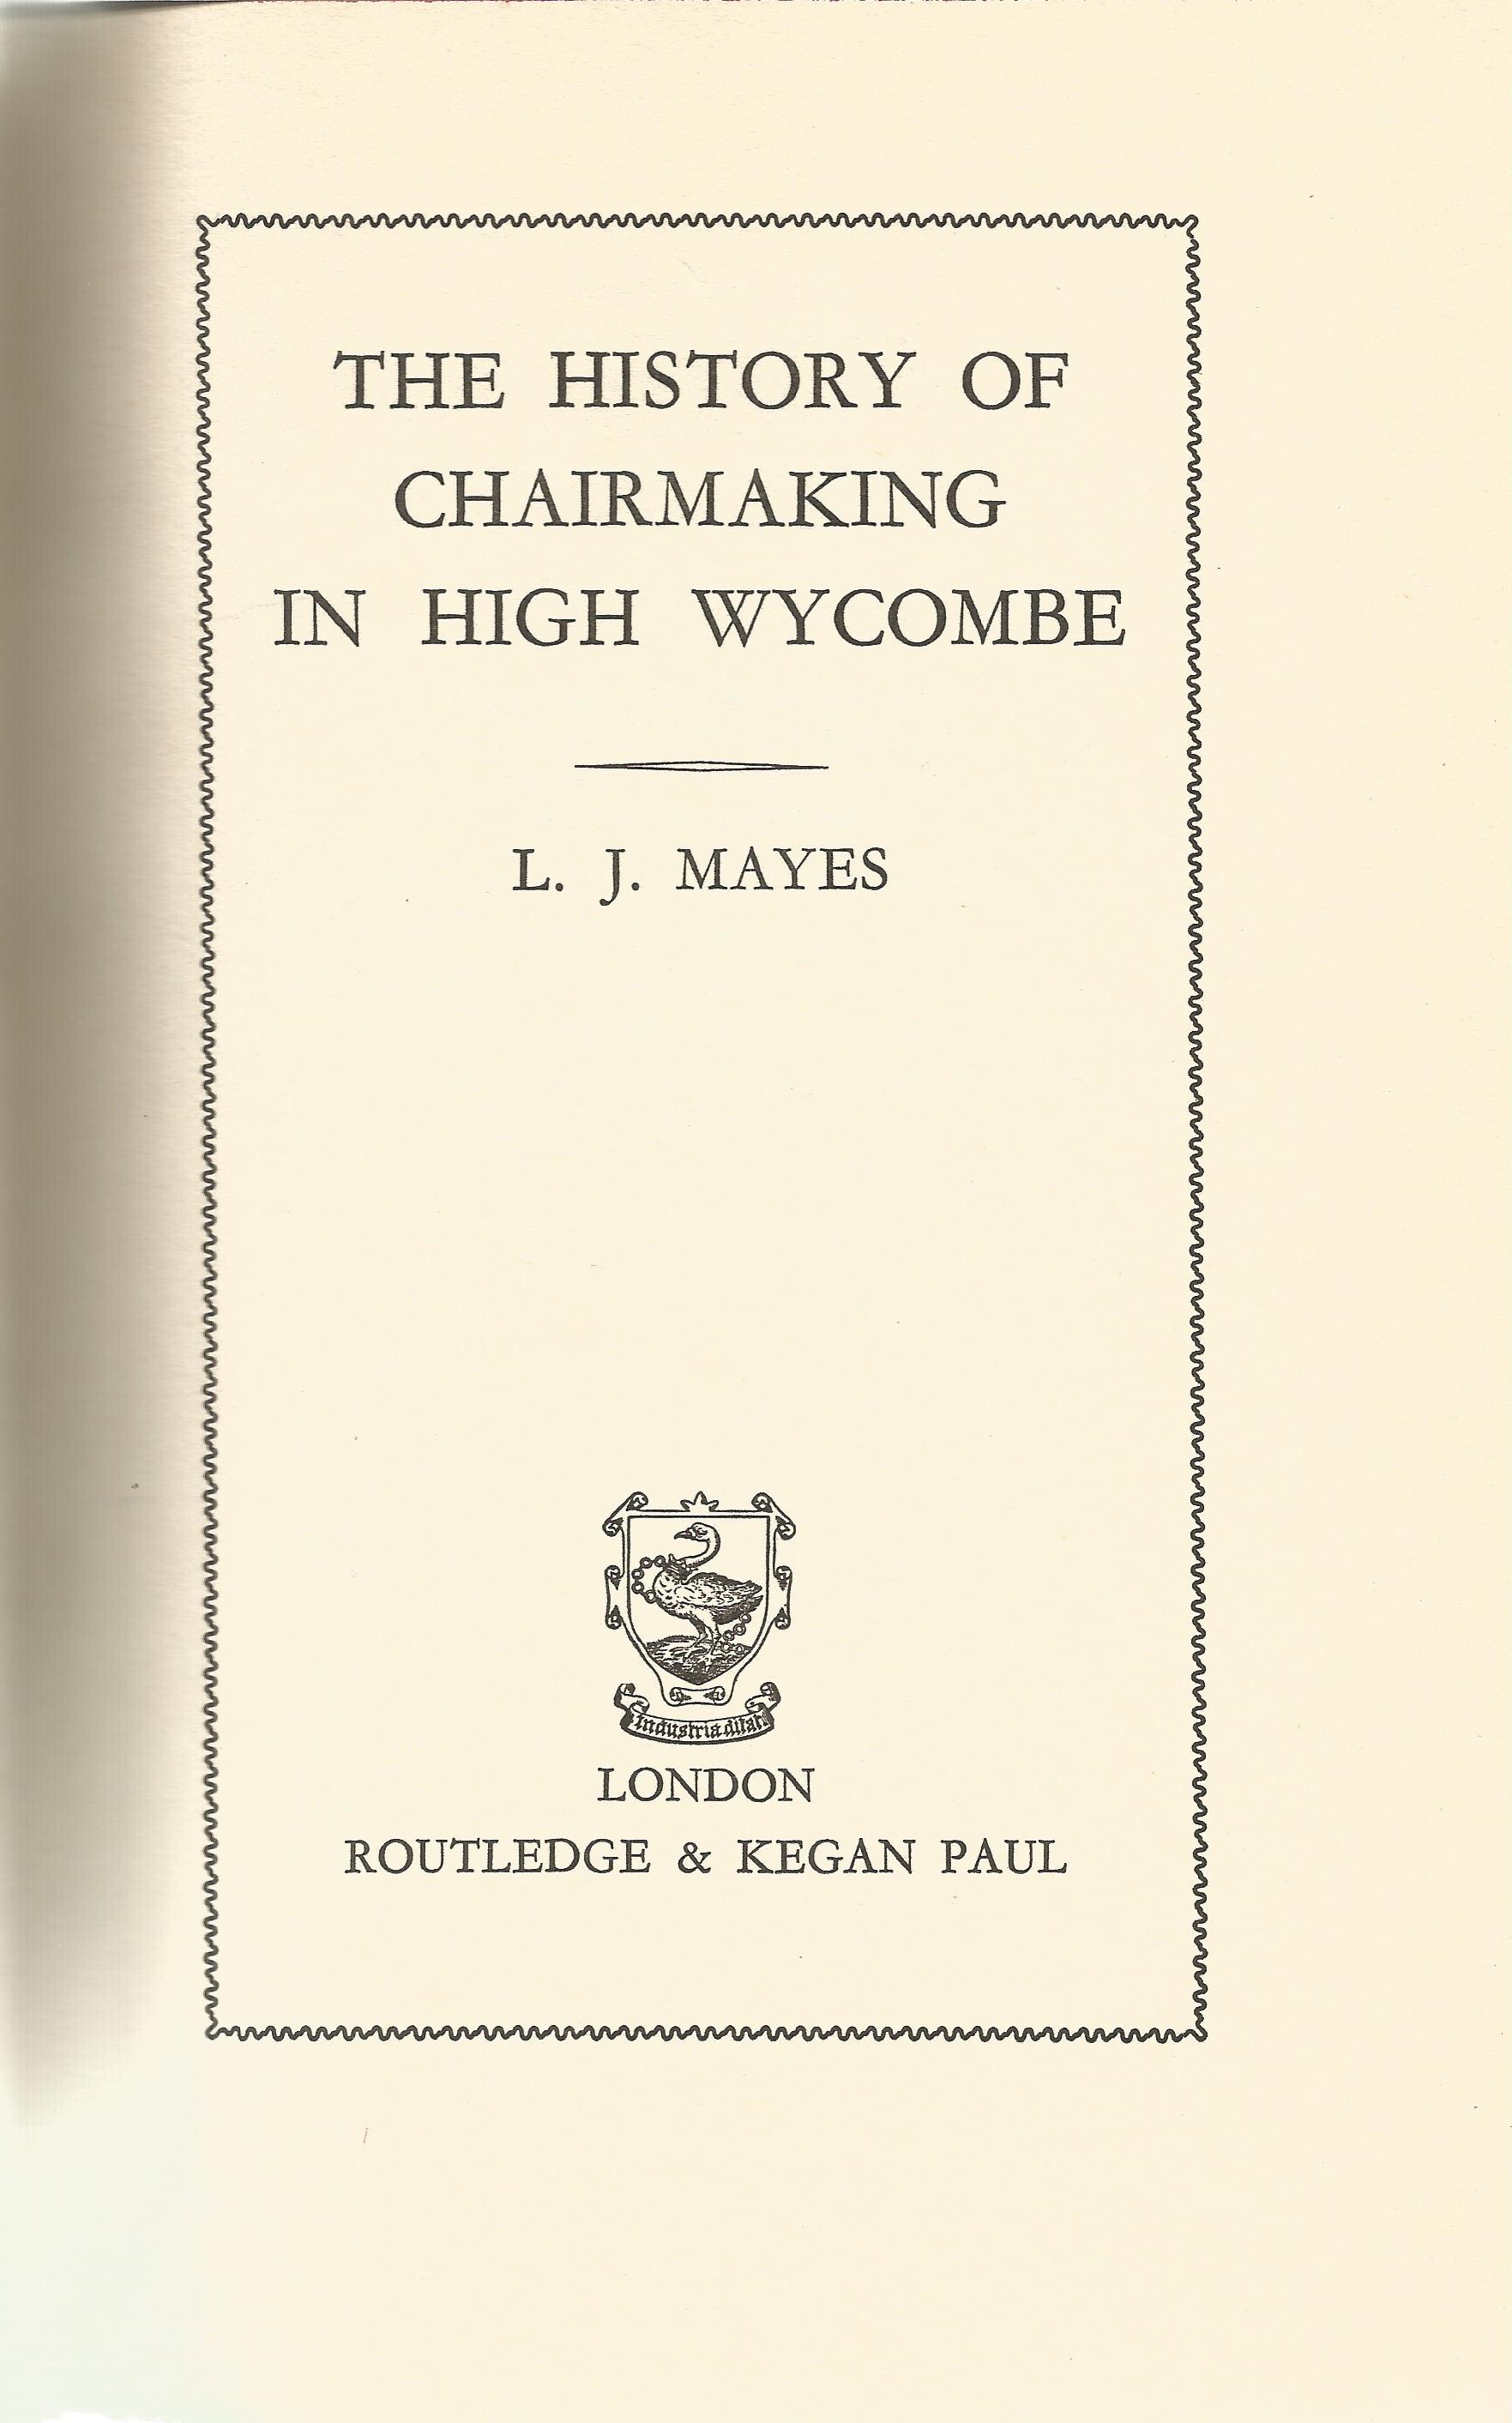 The History of Chair Making in High Wycombe by L J Mayes Hardback Book 1960 First Edition - Image 2 of 3